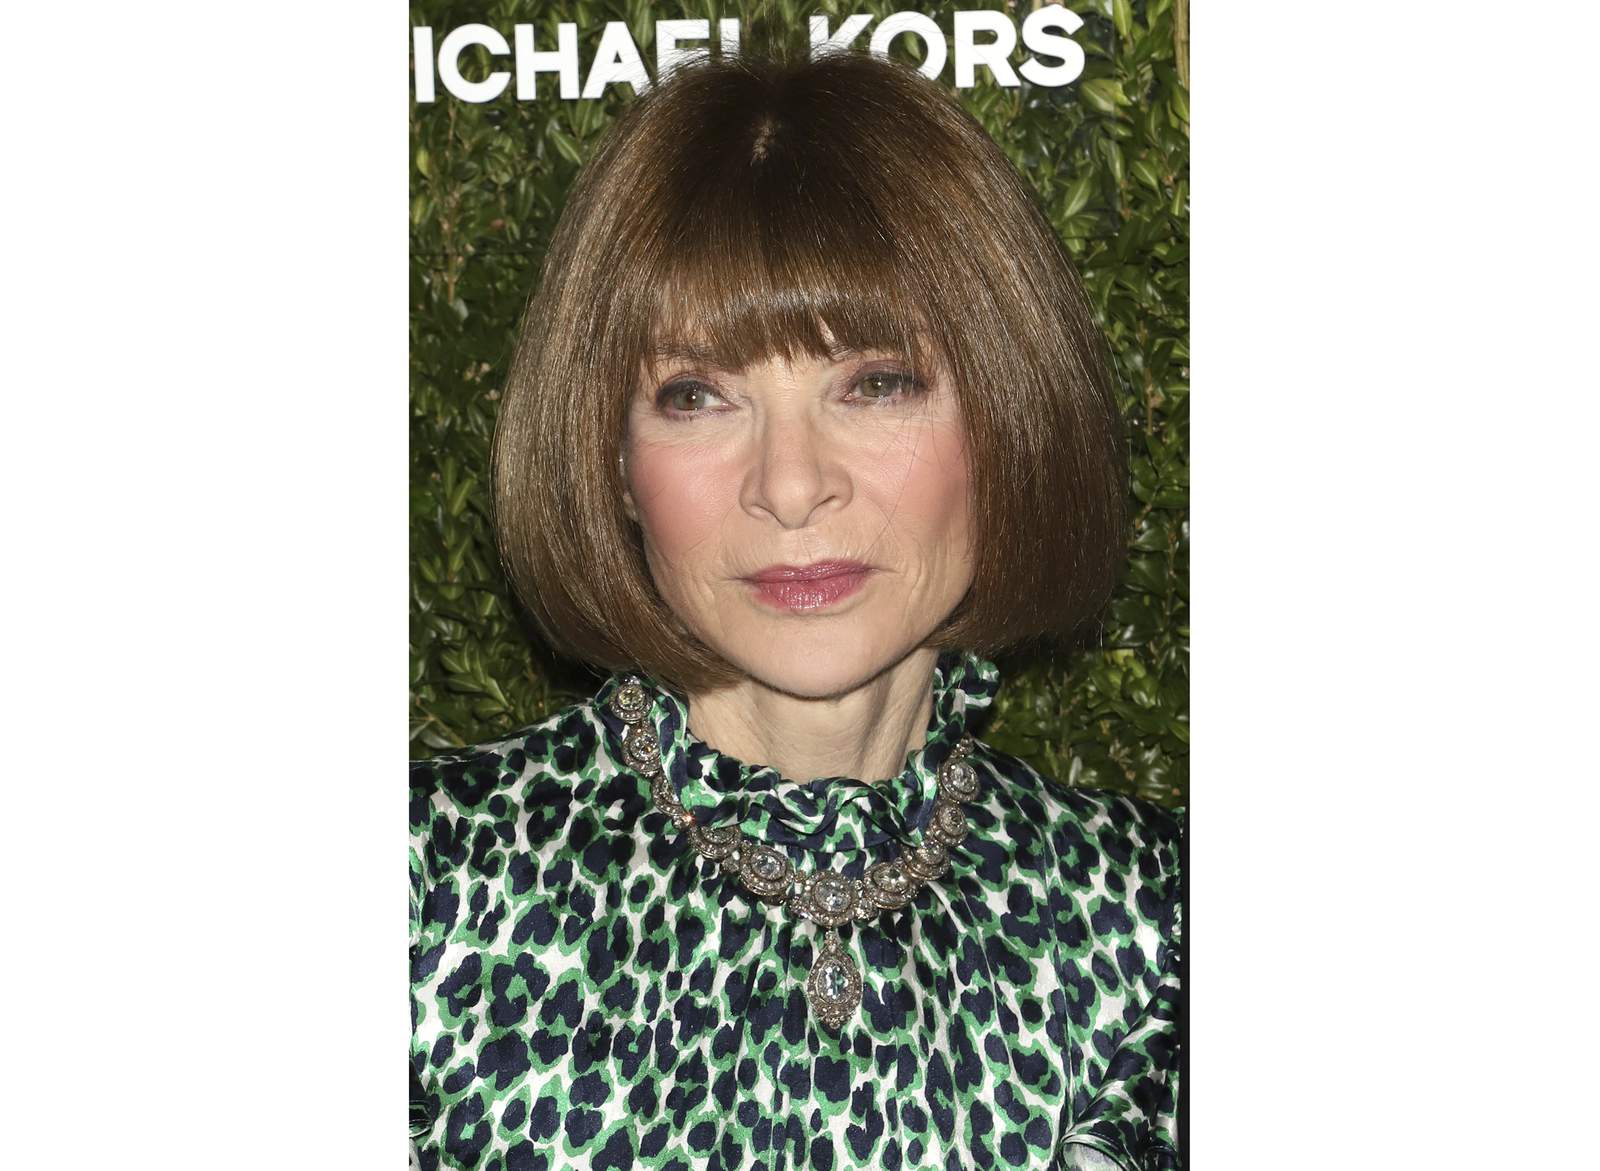 Anna Wintour apologizes for race-related `mistakes'